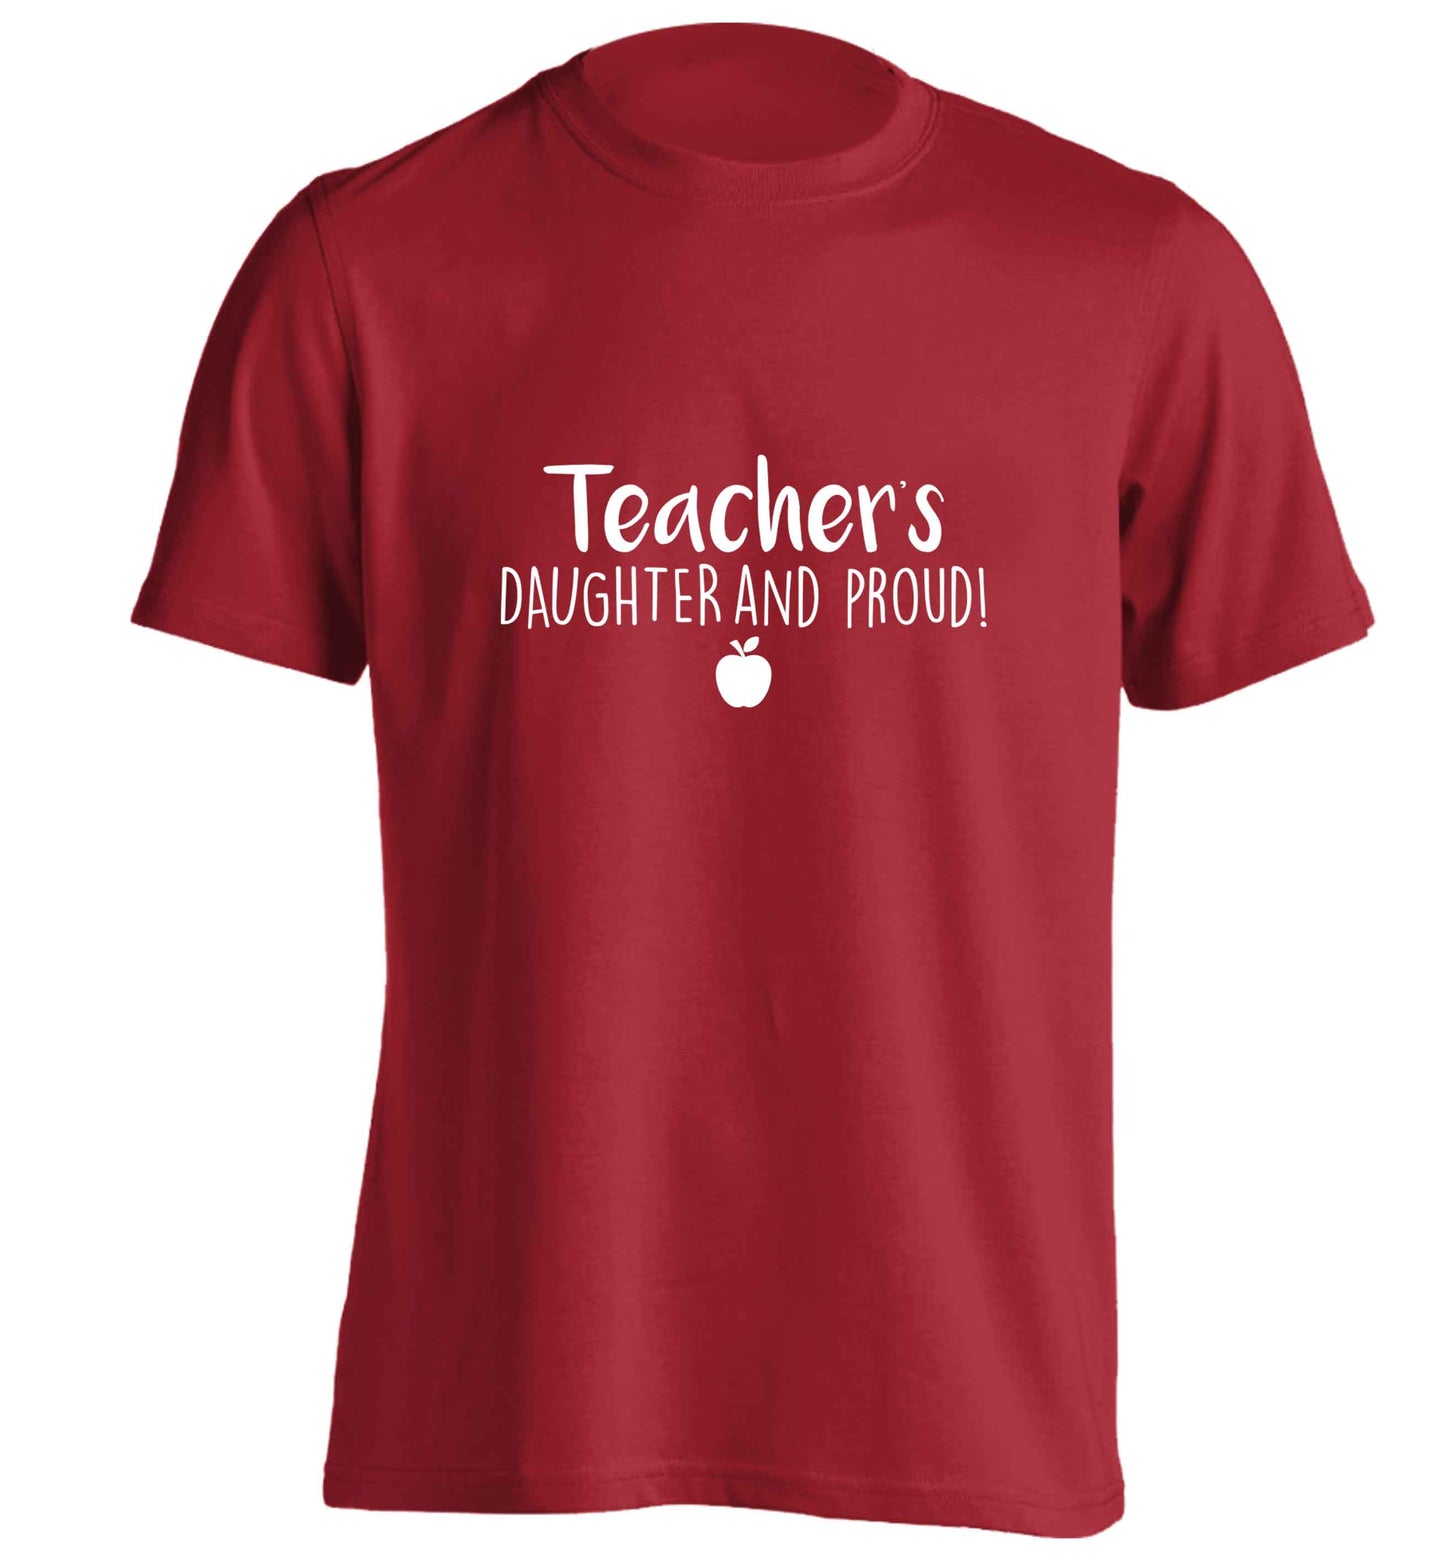 Teachers daughter and proud adults unisex red Tshirt 2XL